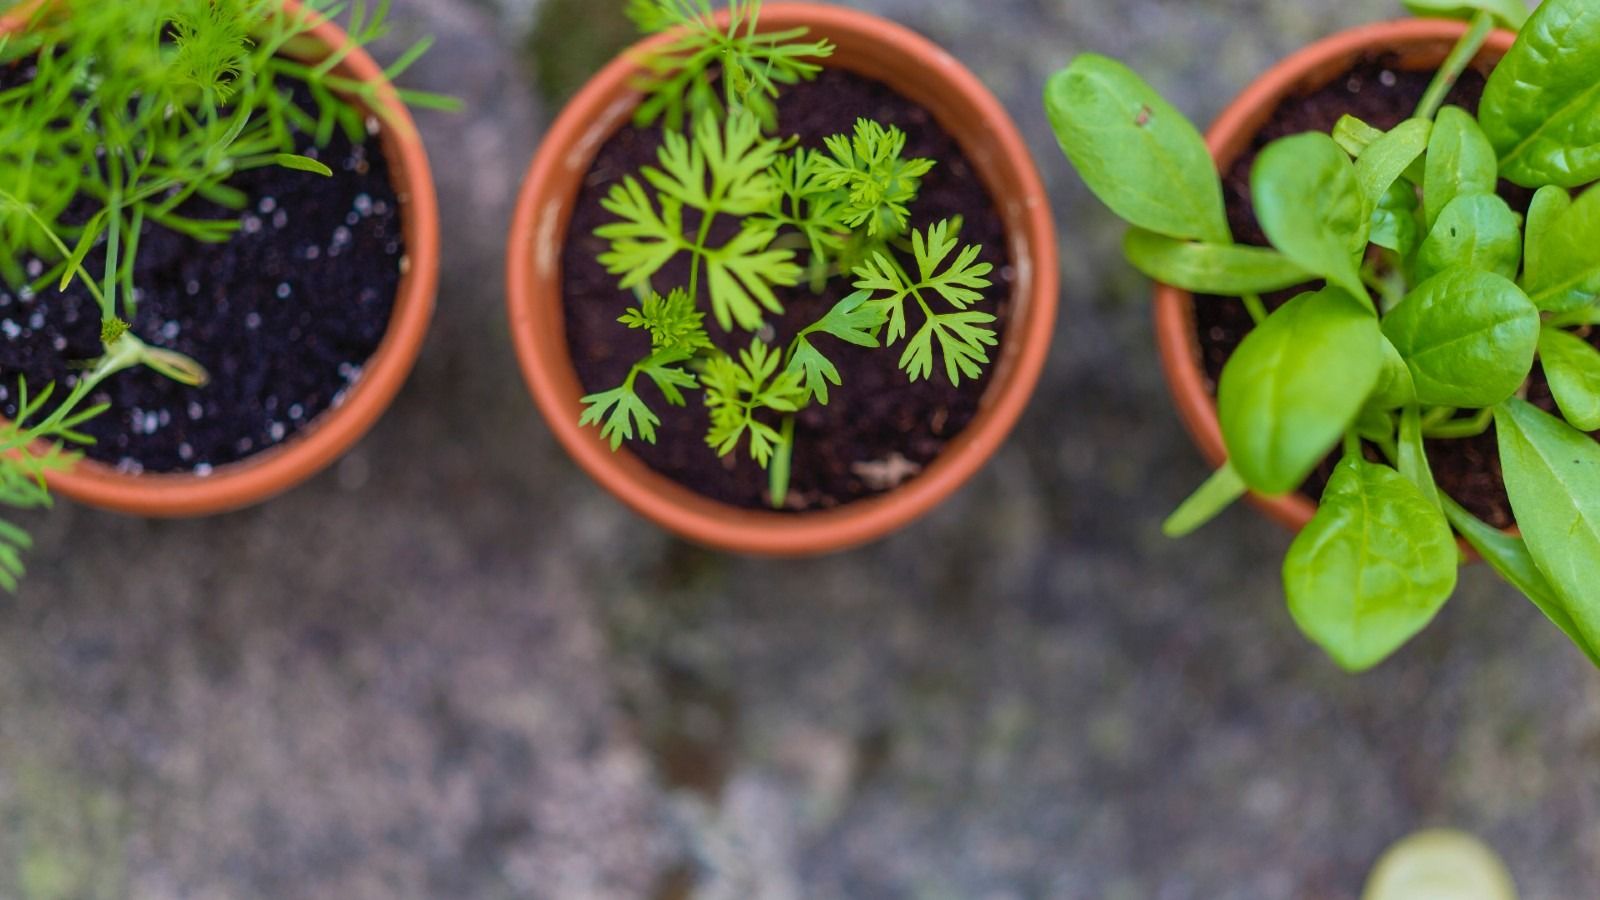 Aerial image of seedlings in three small pots. banner image